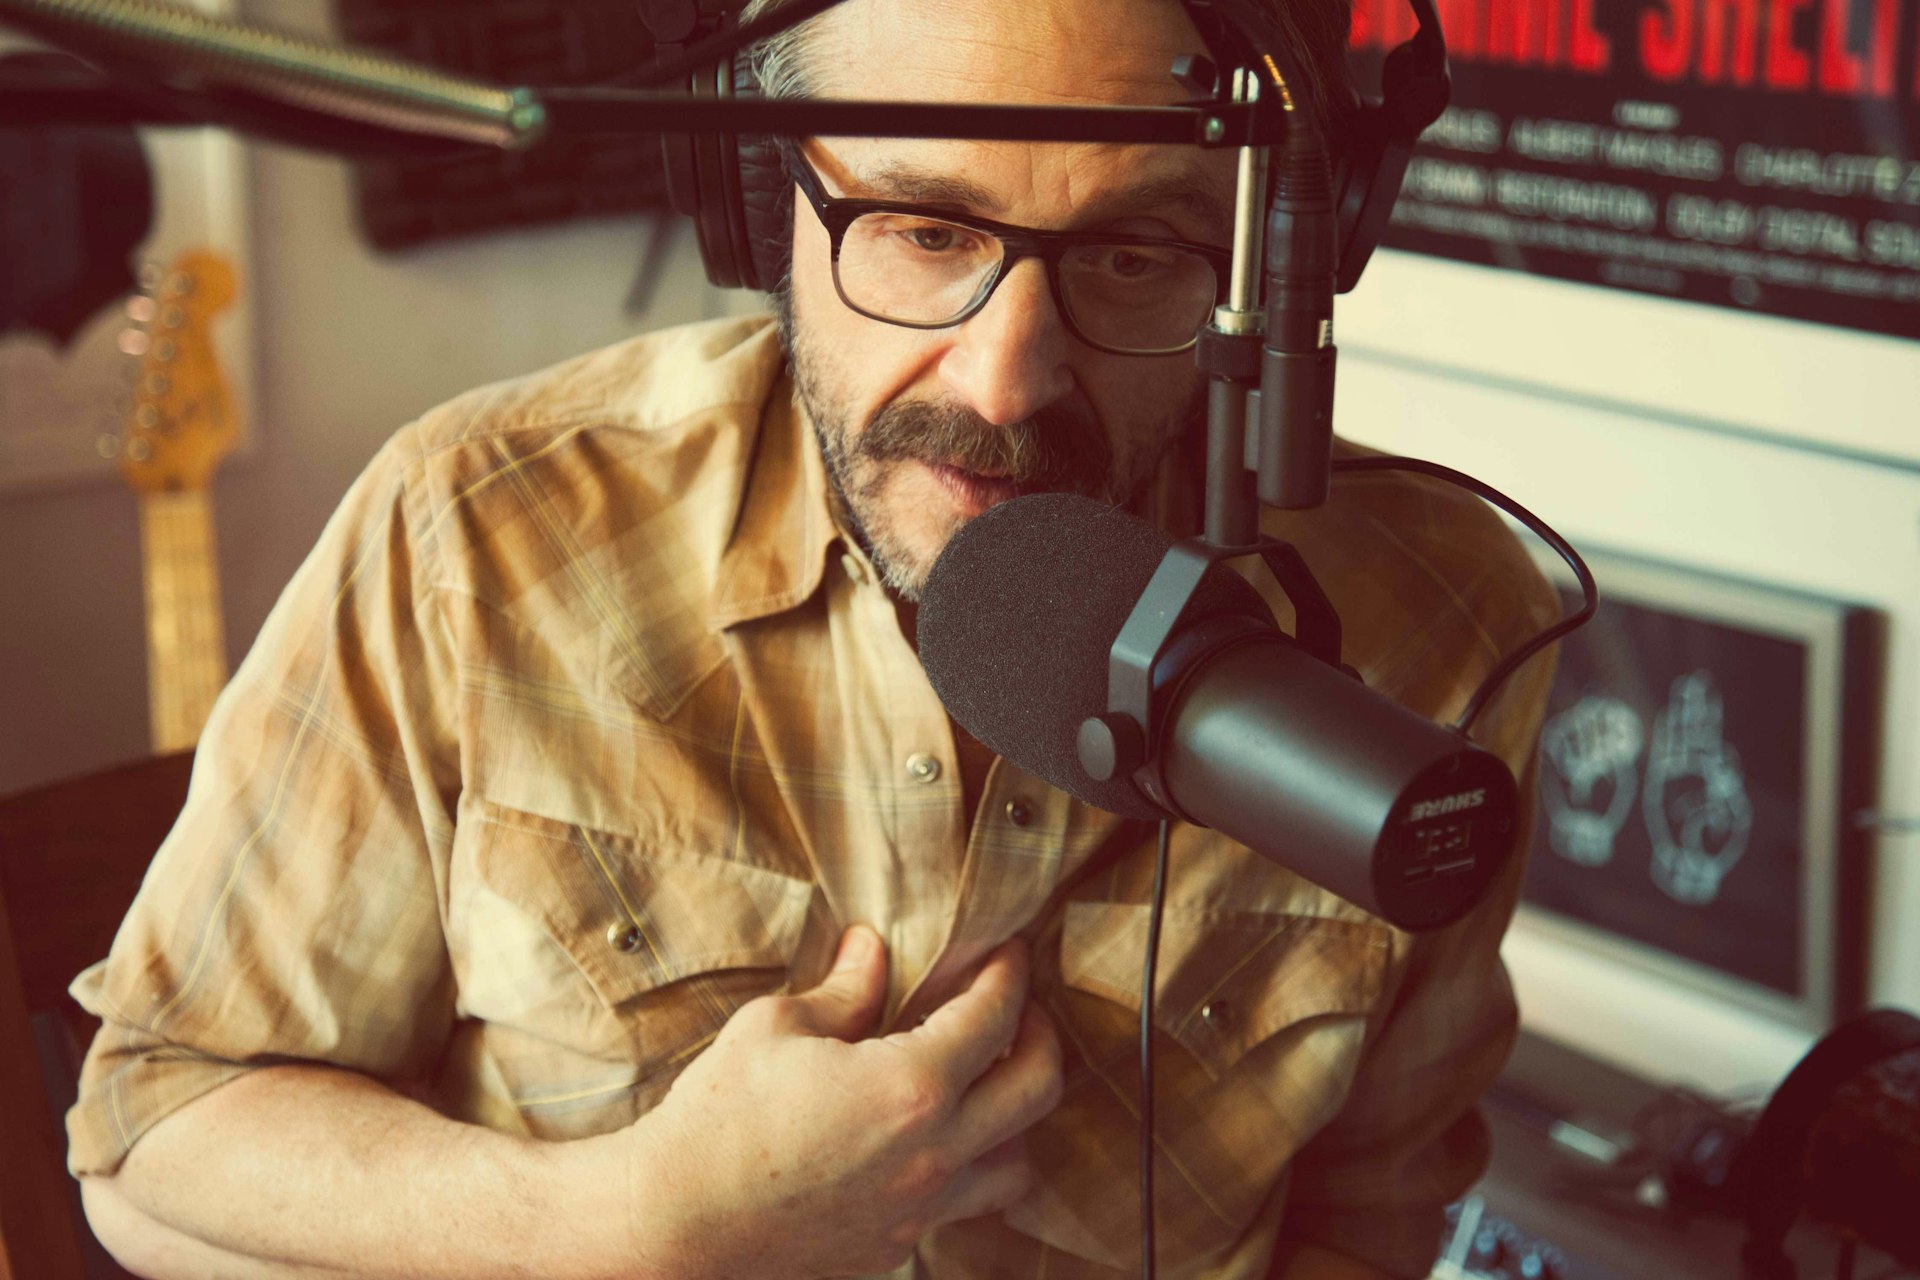 Marc Maron on the power to connect through listening